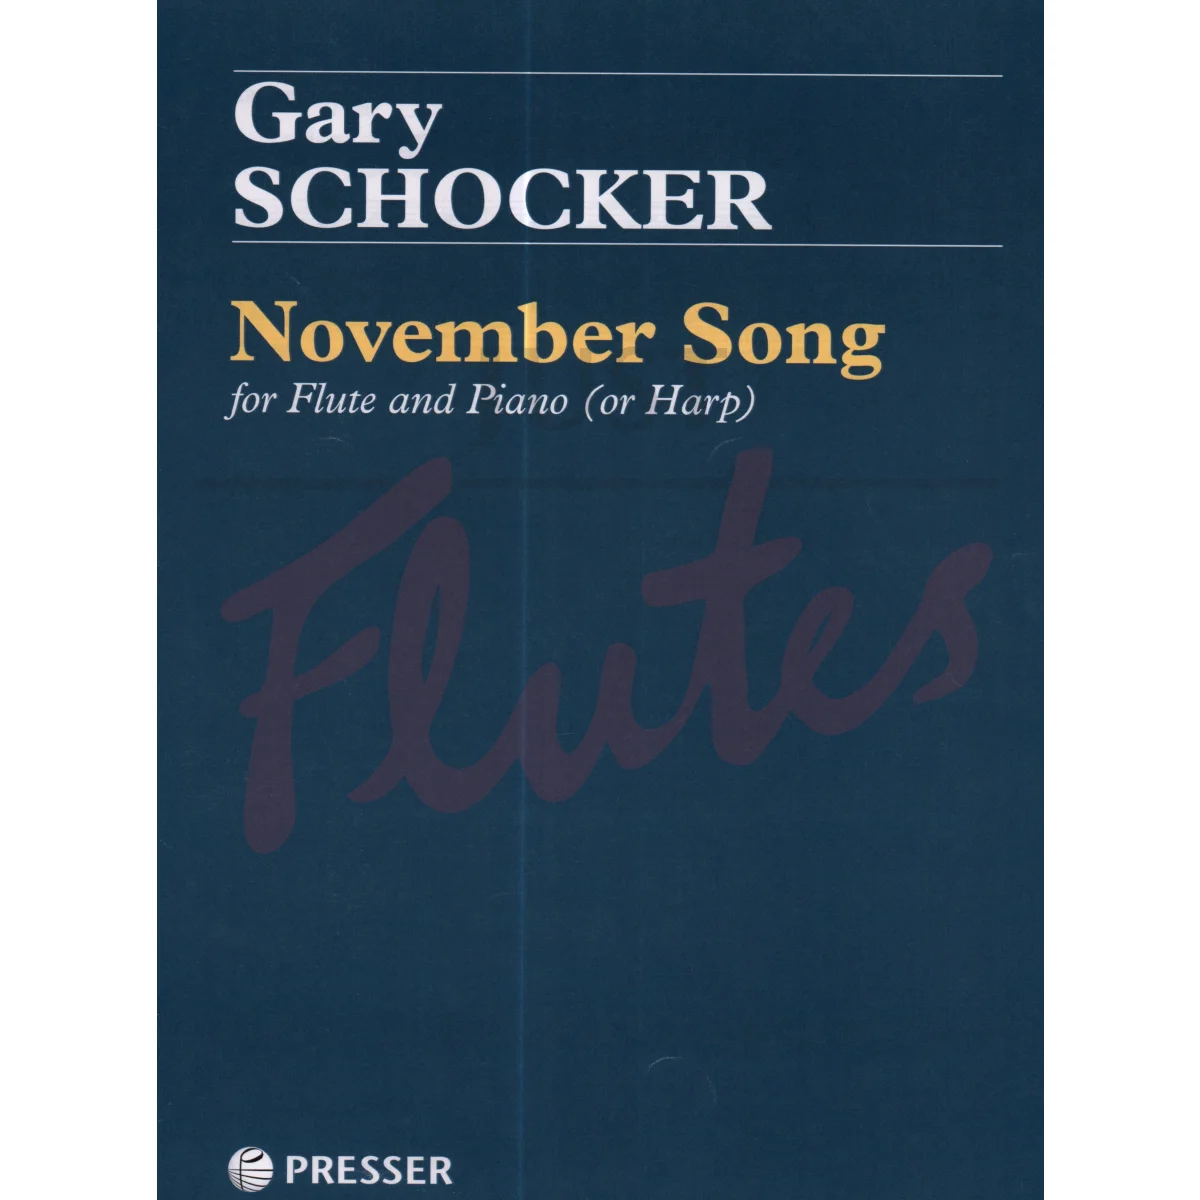 November Song for Flute and Piano (or Harp)